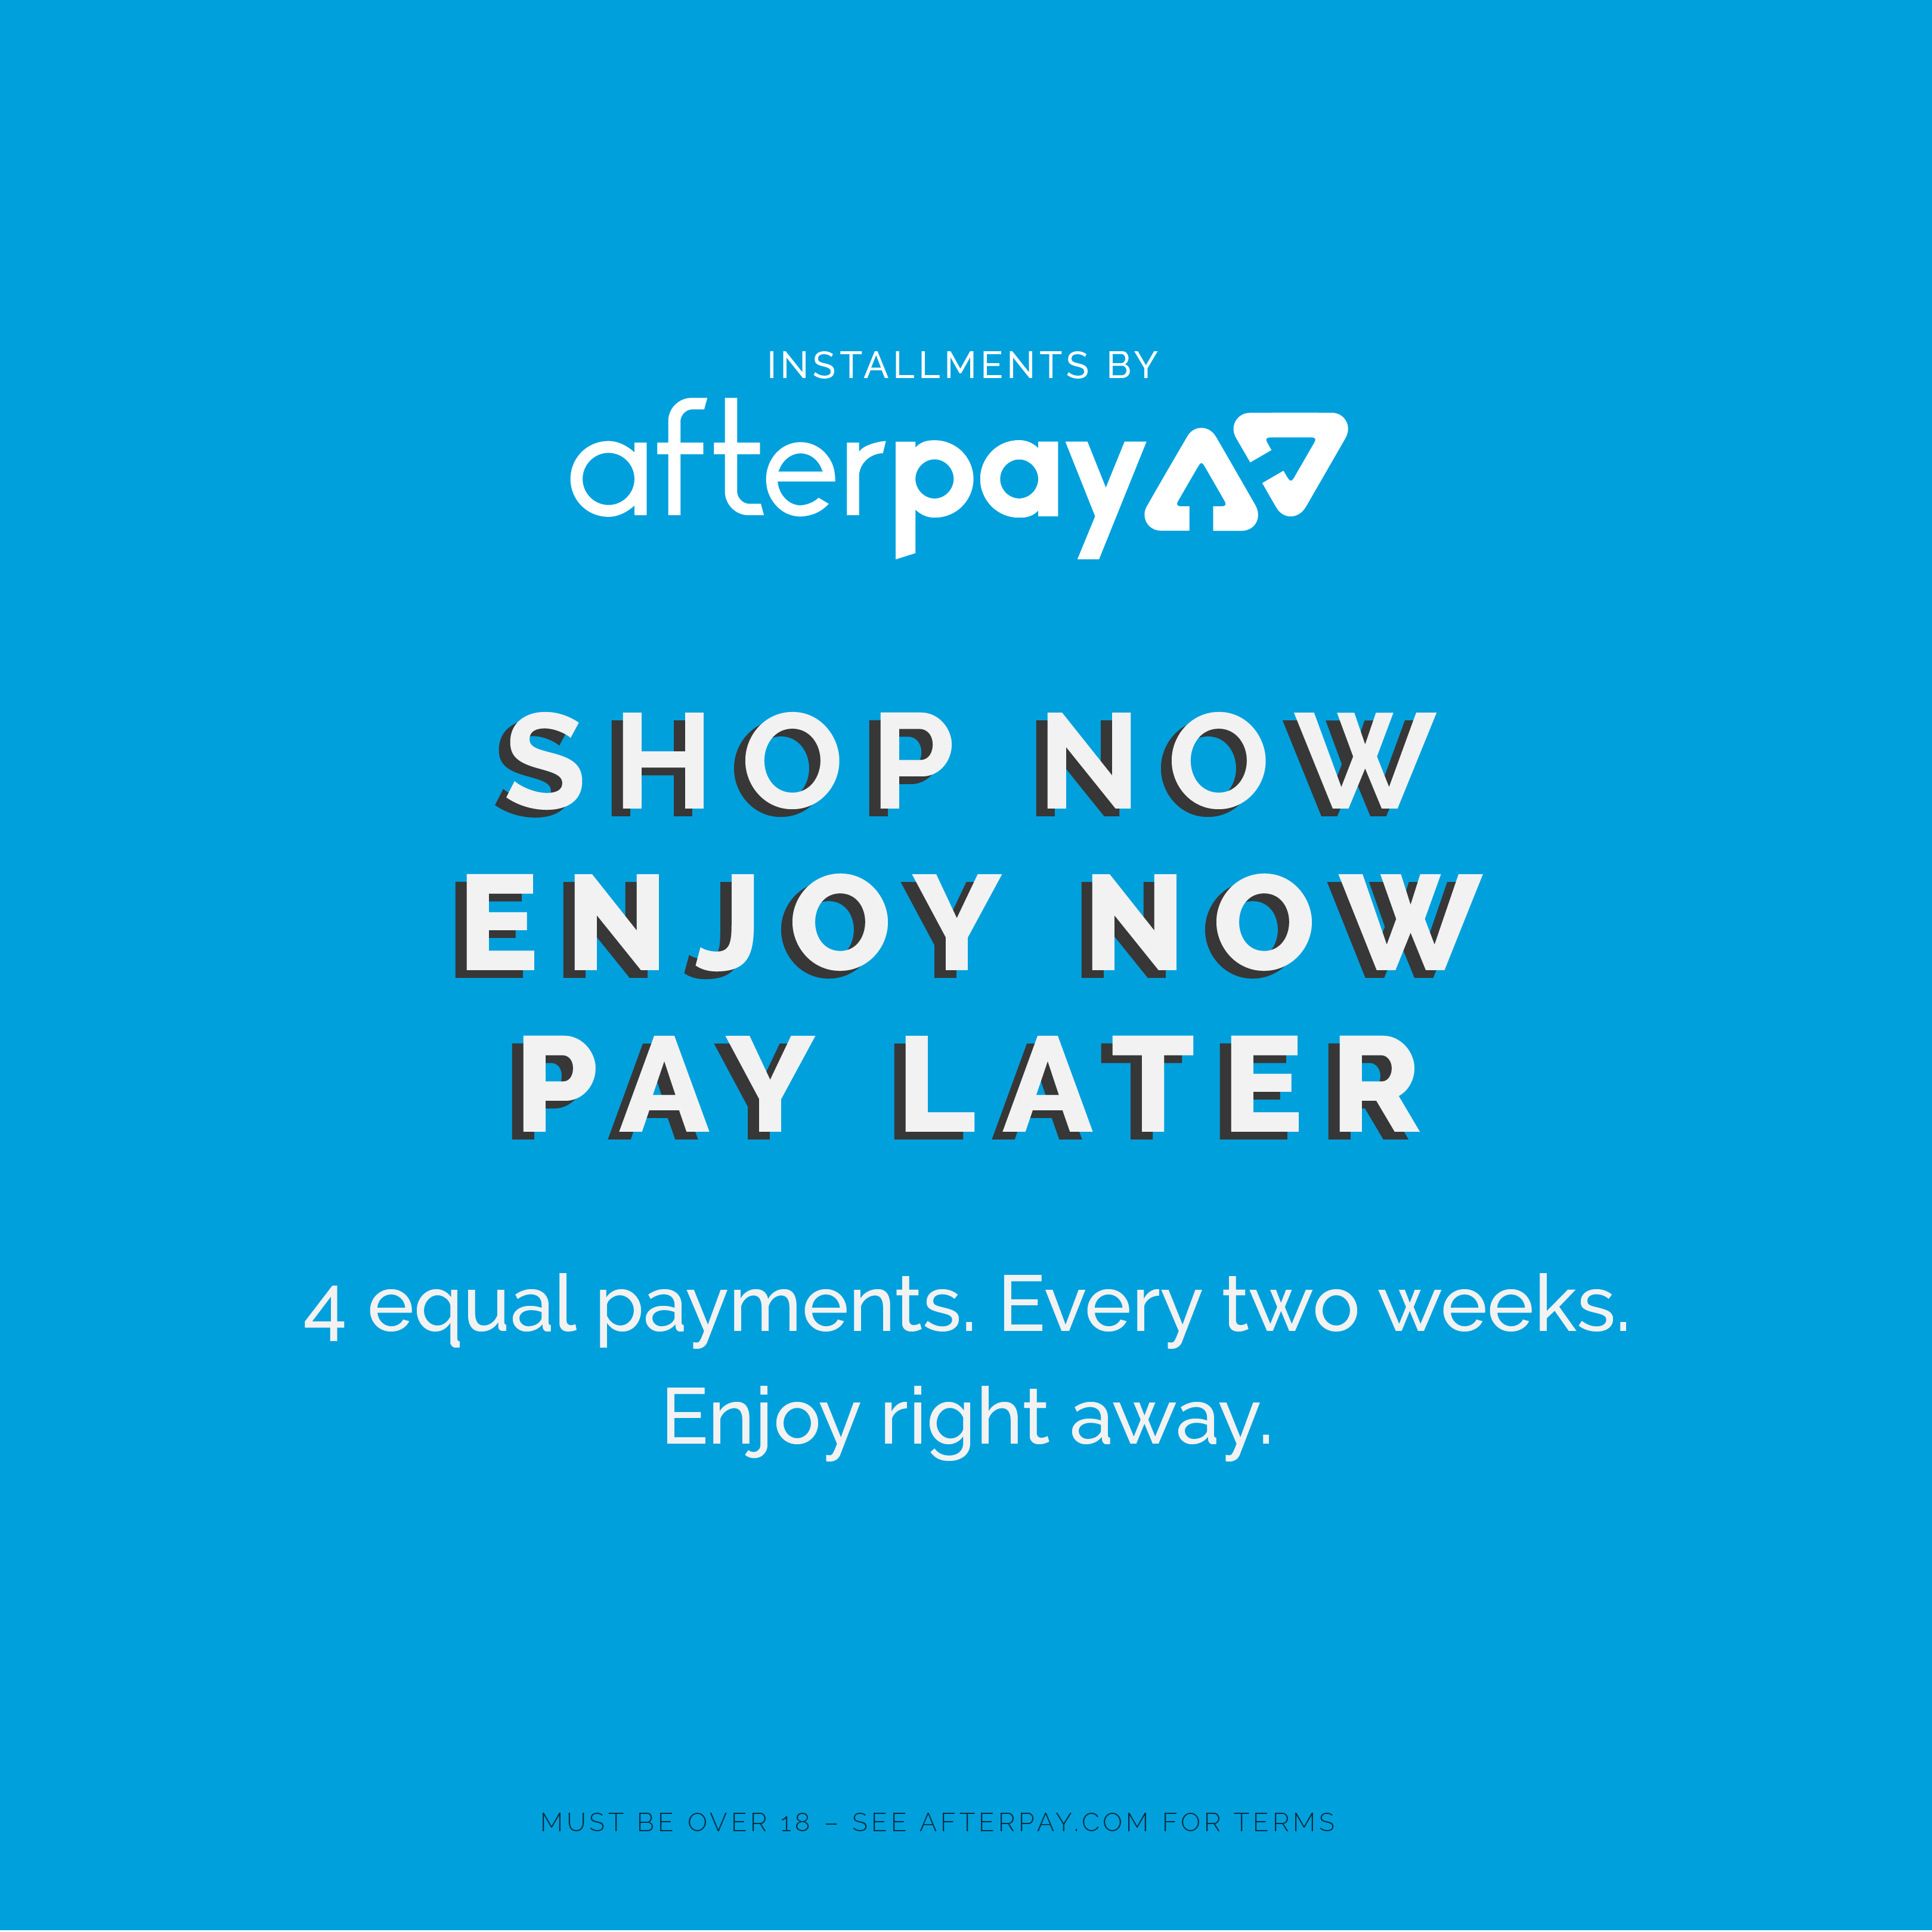 We are now offering AfterPay + a random extra story. – Rainbow Waters